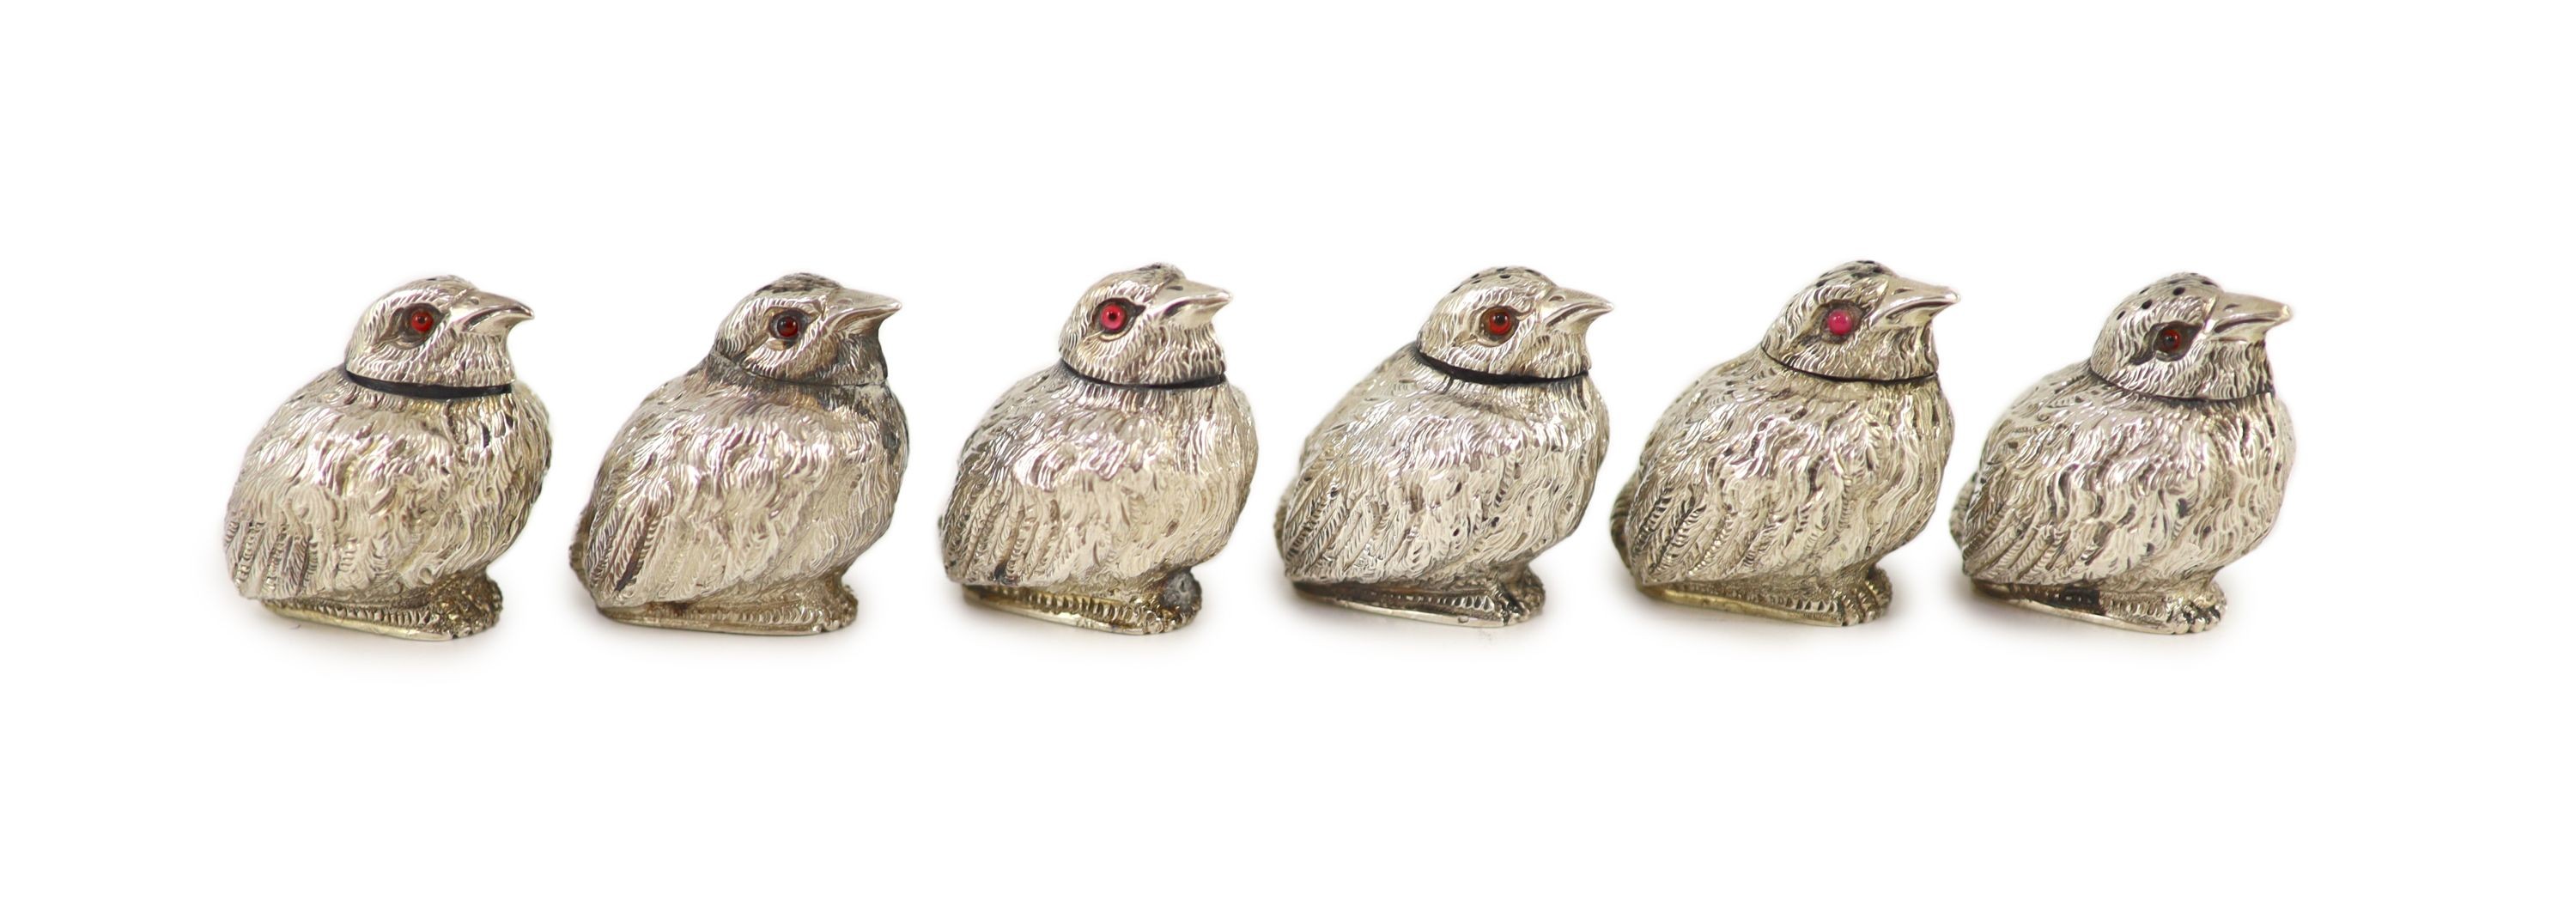 A set of six Victorian novelty silver condiments by Thomas Johnson II, modelled as six chick pepperettes